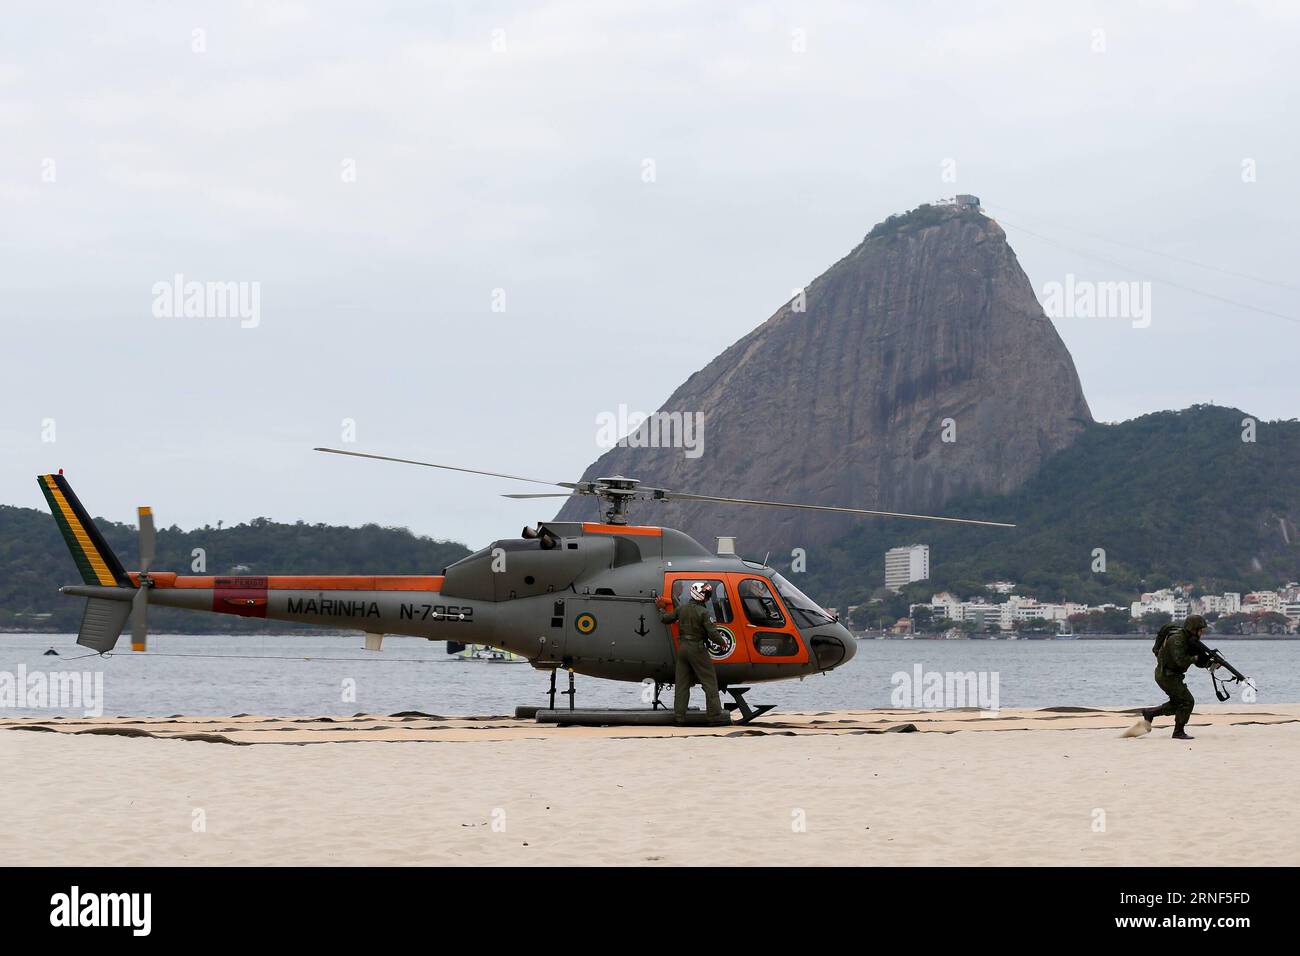 RIO DE JANEIRO, July 19, 2016 -- Brazil s army members take part in a drill of boarding and disembarking in Flamengo, in the south of Rio de Janeiro, Brazil, on July 19, 2016. The drill aimed to ensure the safety of athletes and visitors during the 2016 Rio Olympic Games. /AGENCIA ESTADO) (jp) (da) (hcs) (SP)BRAZIL-RIO DE JANEIRO-SPORTS-OLYMPICS-DRILL LucianoxBelford PUBLICATIONxNOTxINxCHN   Rio de Janeiro July 19 2016 Brazil S Army Members Take Part in a Drill of Boarding and disembarking in Flamengo in The South of Rio de Janeiro Brazil ON July 19 2016 The Drill aimed to Ensure The Safety of Stock Photo